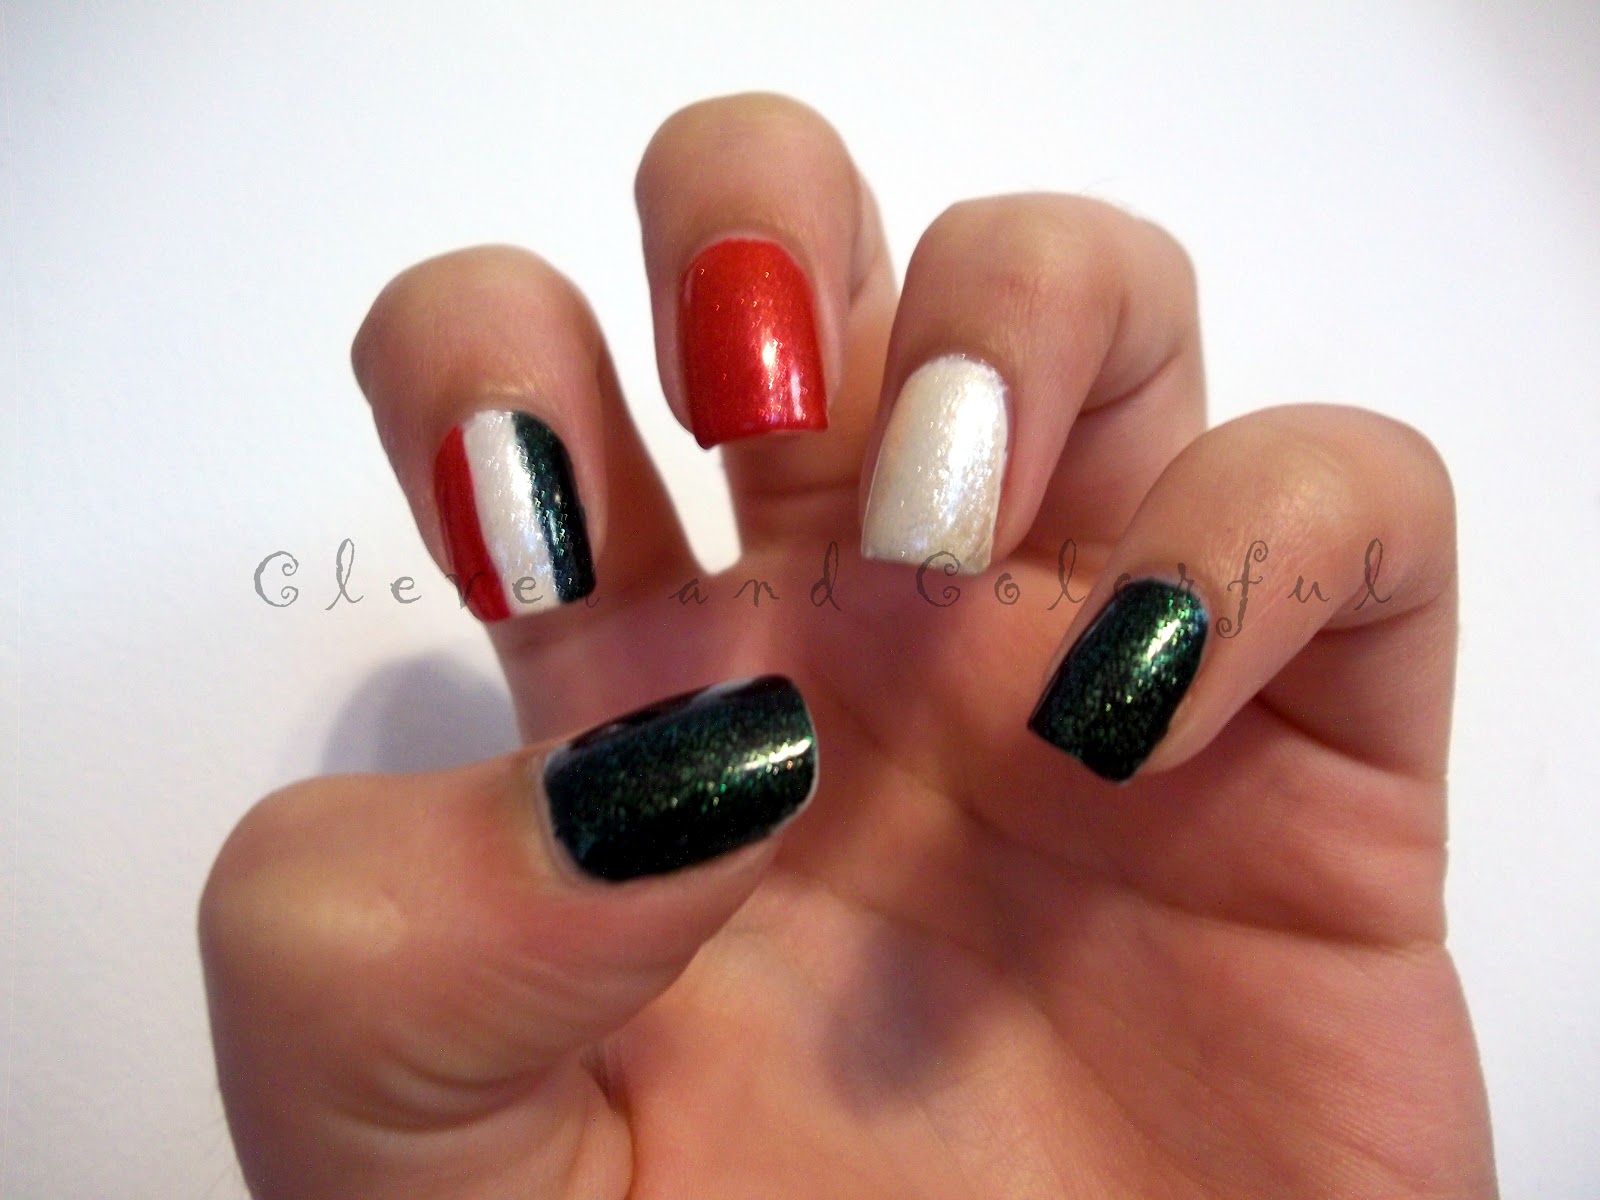 Clever and Colorful: Italian Manicure!